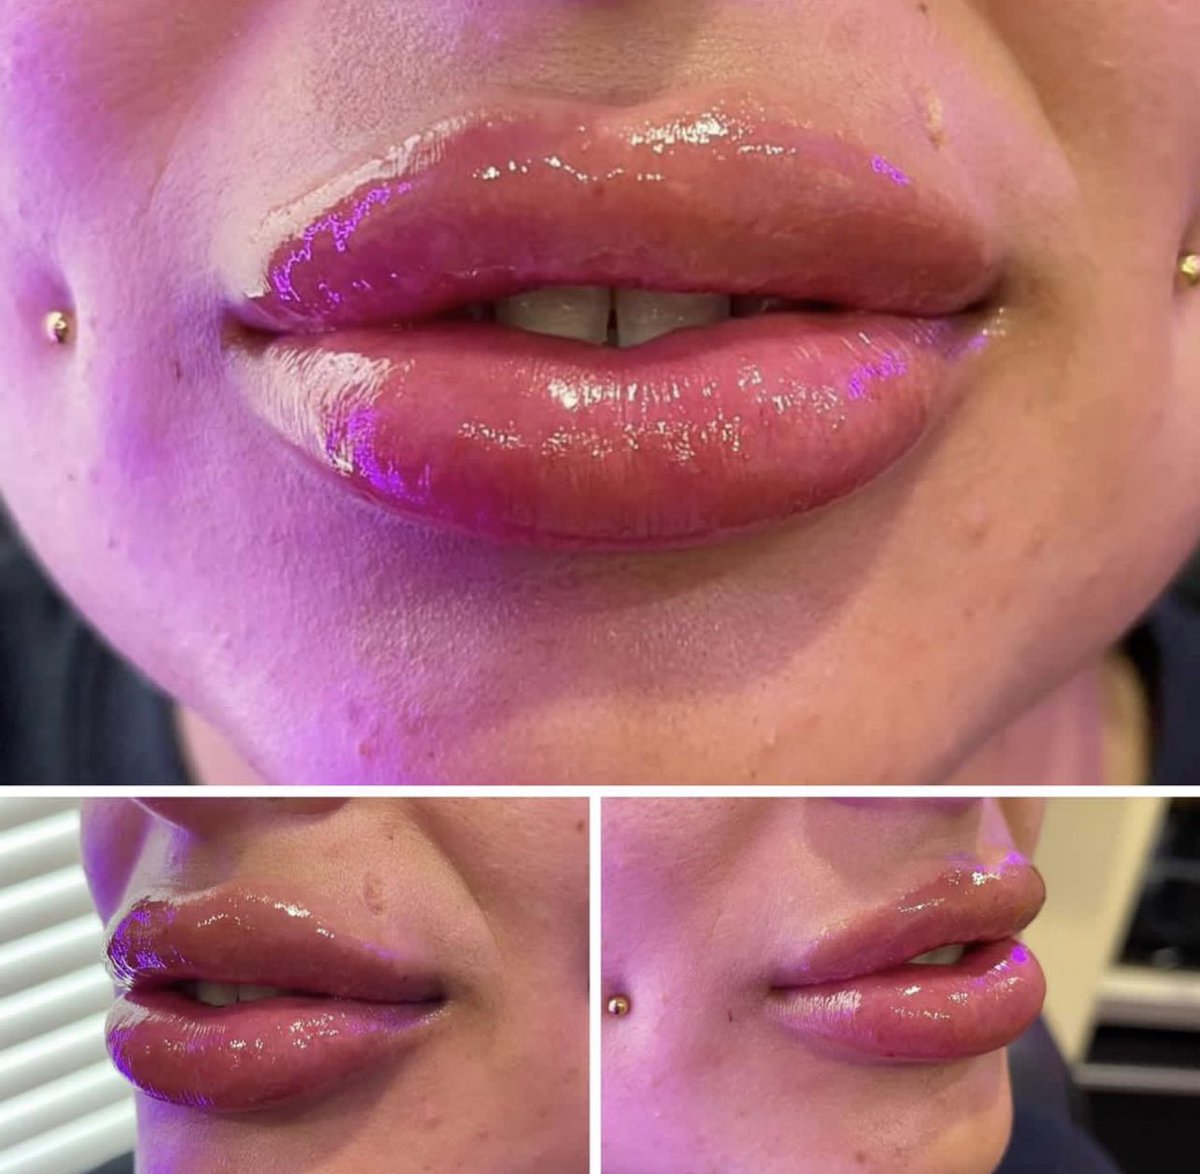 Allure Aesthetix 
361-462-4464 
Allergan’s TOP 5 Injector 

May use Alle points & coupons #lips #lipfiller #lipinjections #cosmeticiniector #beauty 
#botox #masterinjector #allergan #cosmetic #injectables #beauty #corpuschristi #women #juvederm